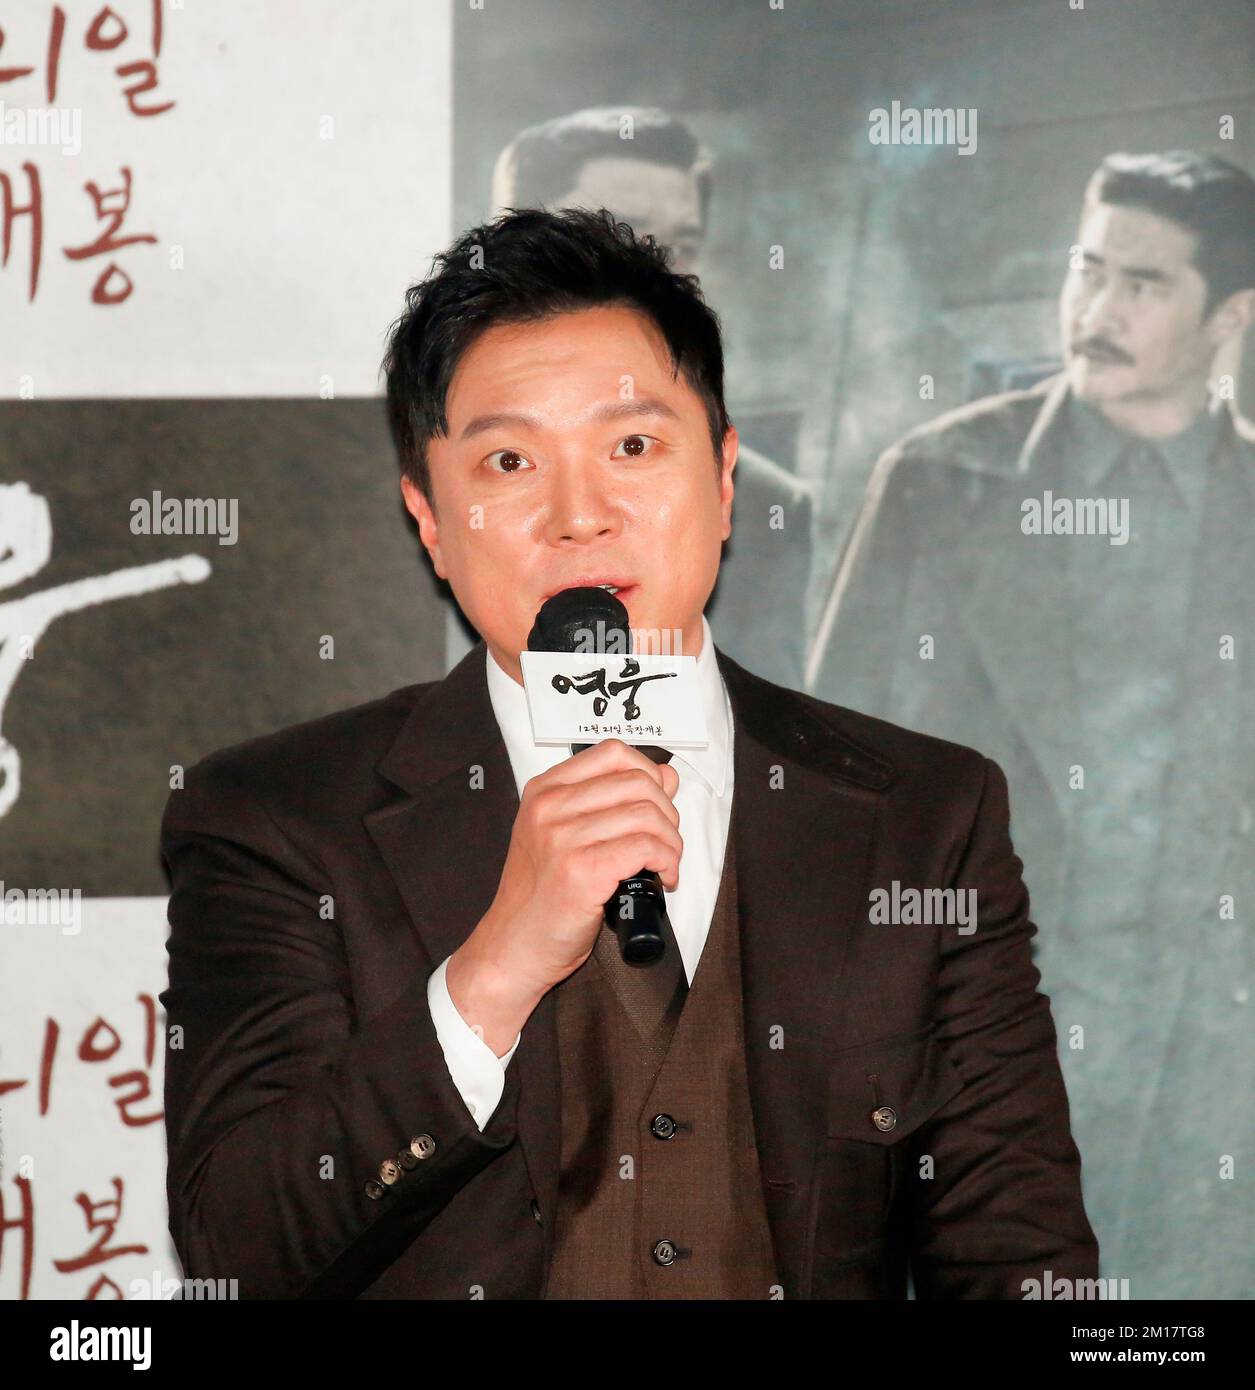 Chung Sung-Hwa, Dec 8, 2022 : South Korean actor Chung Sung-Hwa attends a press conference after a press preview of the movie "Hero" in Seoul, South Korea. The upcoming South Korean musical drama film is about Korean independence fighter Ahn Jung-Geun (1879-1910) who assassinated on October 26, 1909, Ito Hirobumi, Japan's first prime minister and resident-general of Korea at Harbin station in northern China. Ahn was executed at the age of 31 in March 1910. Japan colonised Korea from 1910 to 1945. Credit: Lee Jae-Won/AFLO/Alamy Live News Stock Photo